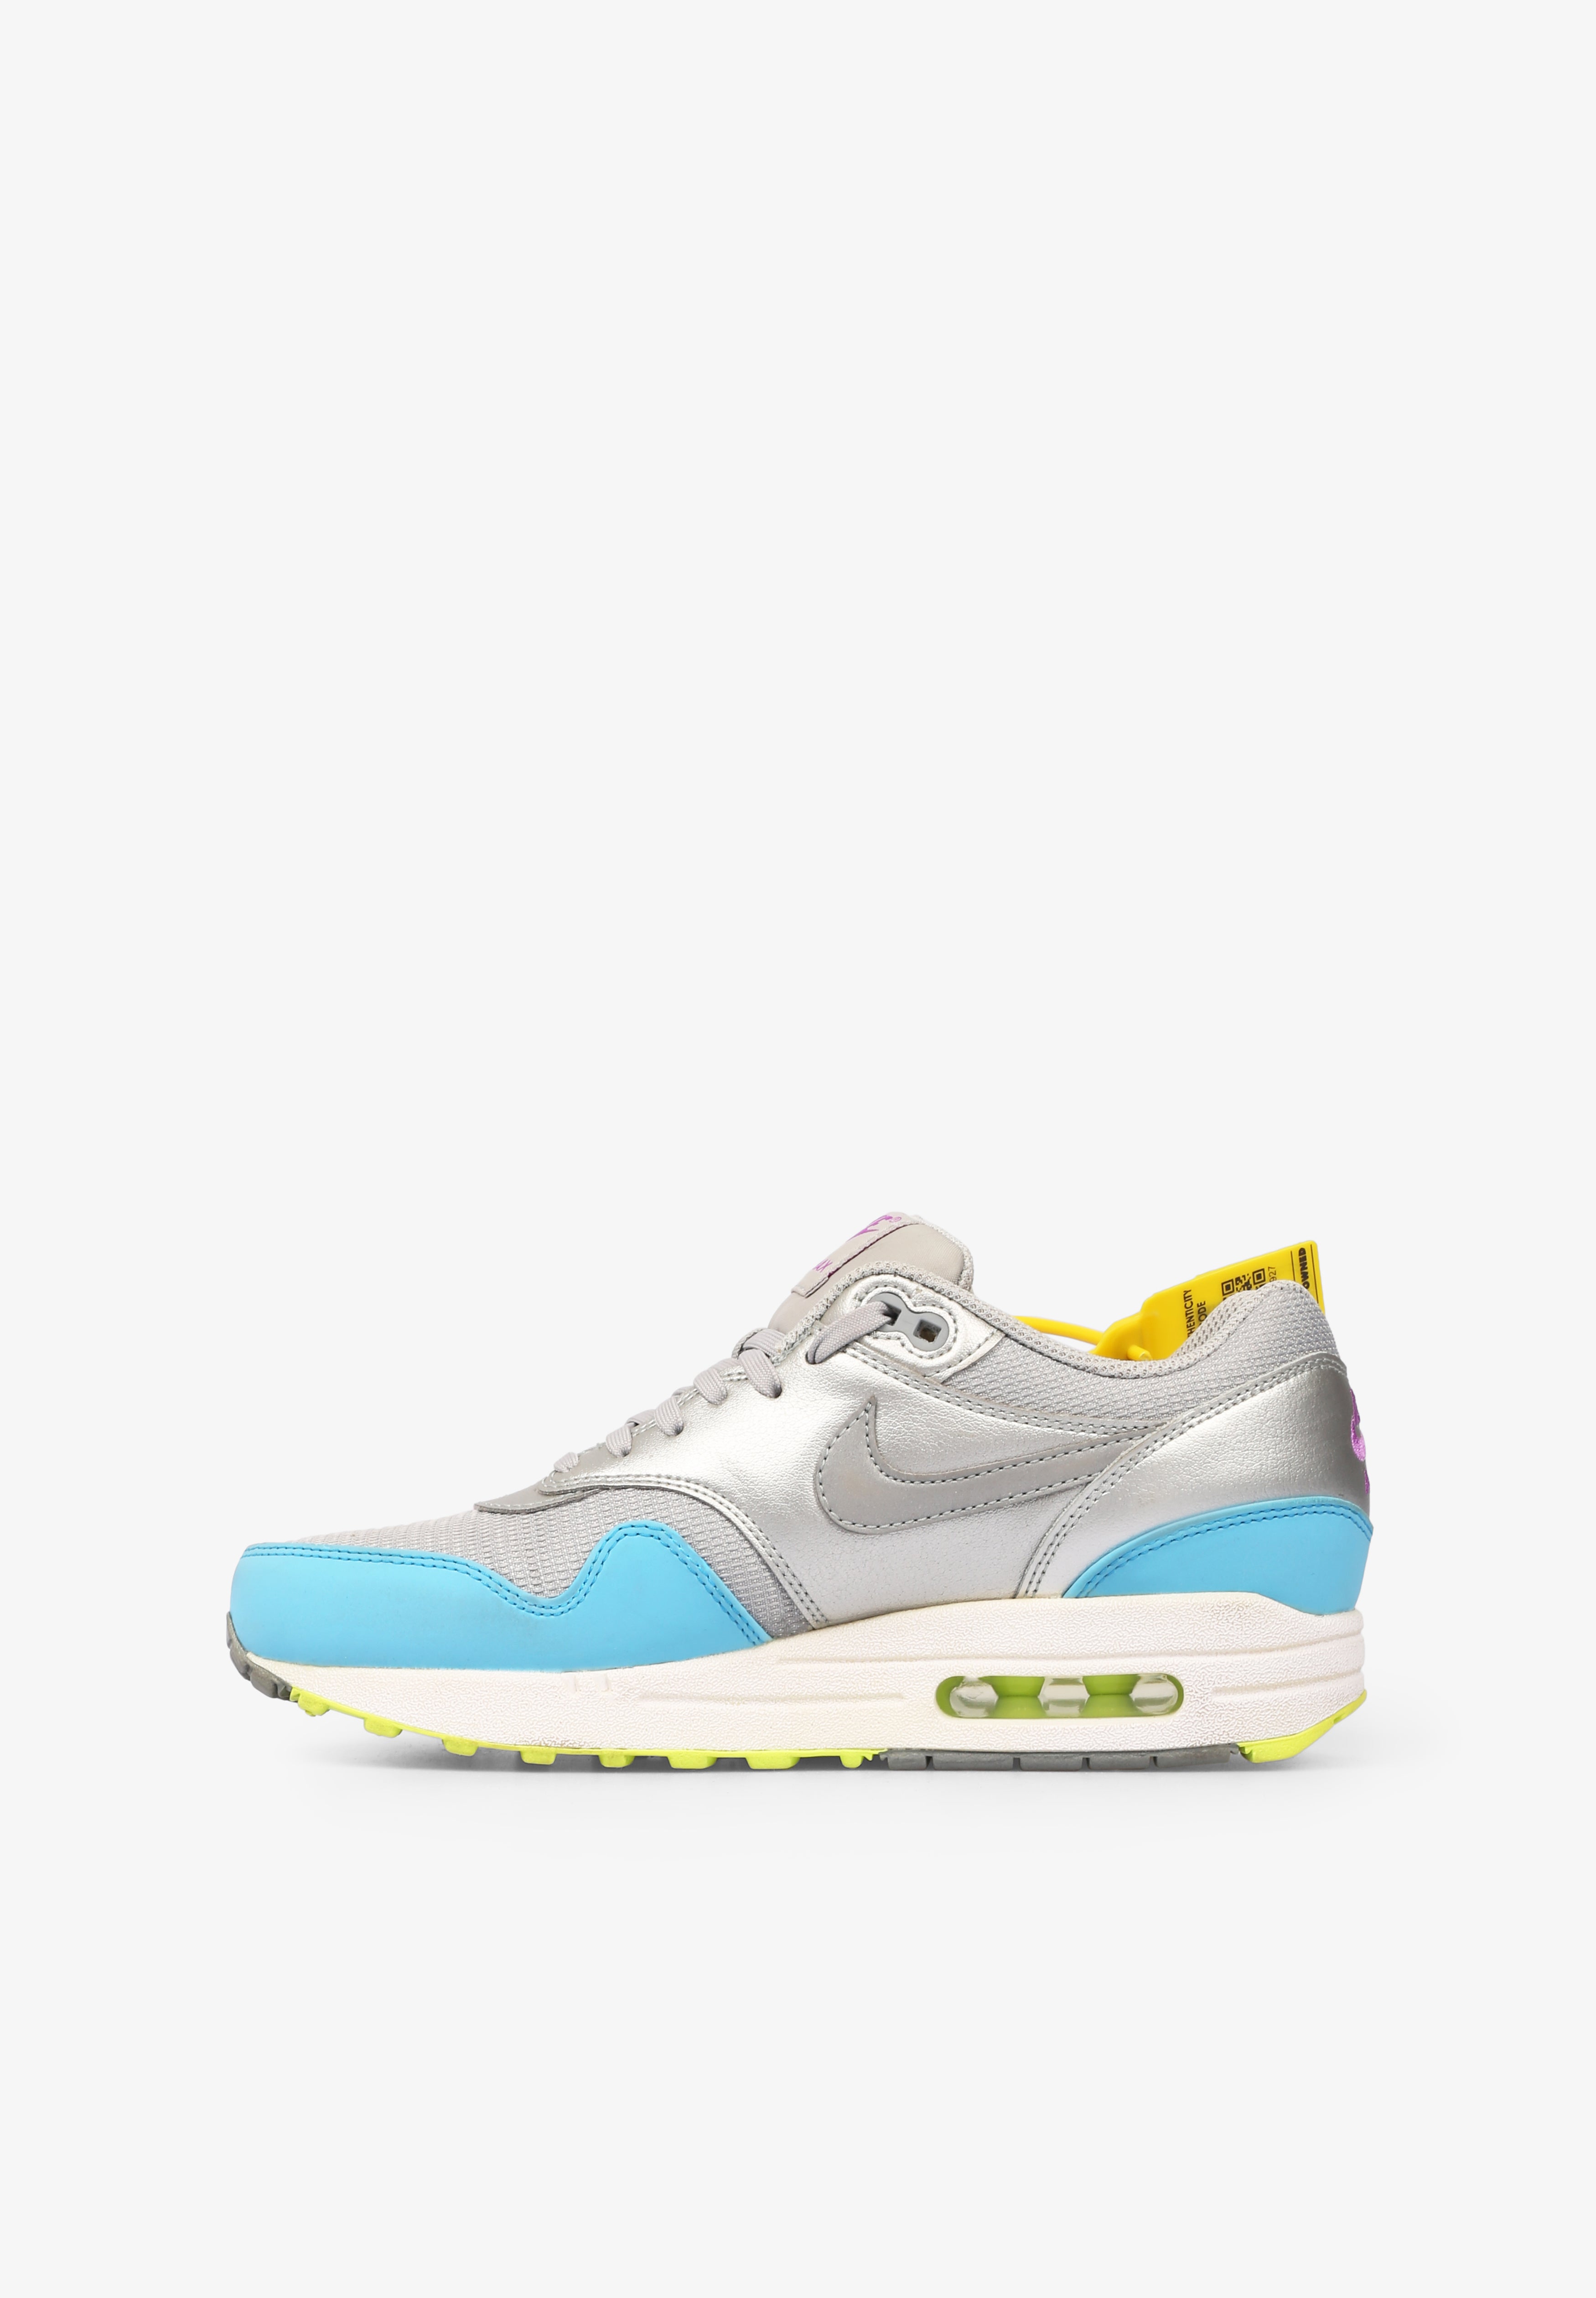 ARCHIVE SNEAKRS | SNEAKERS NIKE AIR MAX 1 FB TALLA 38.5